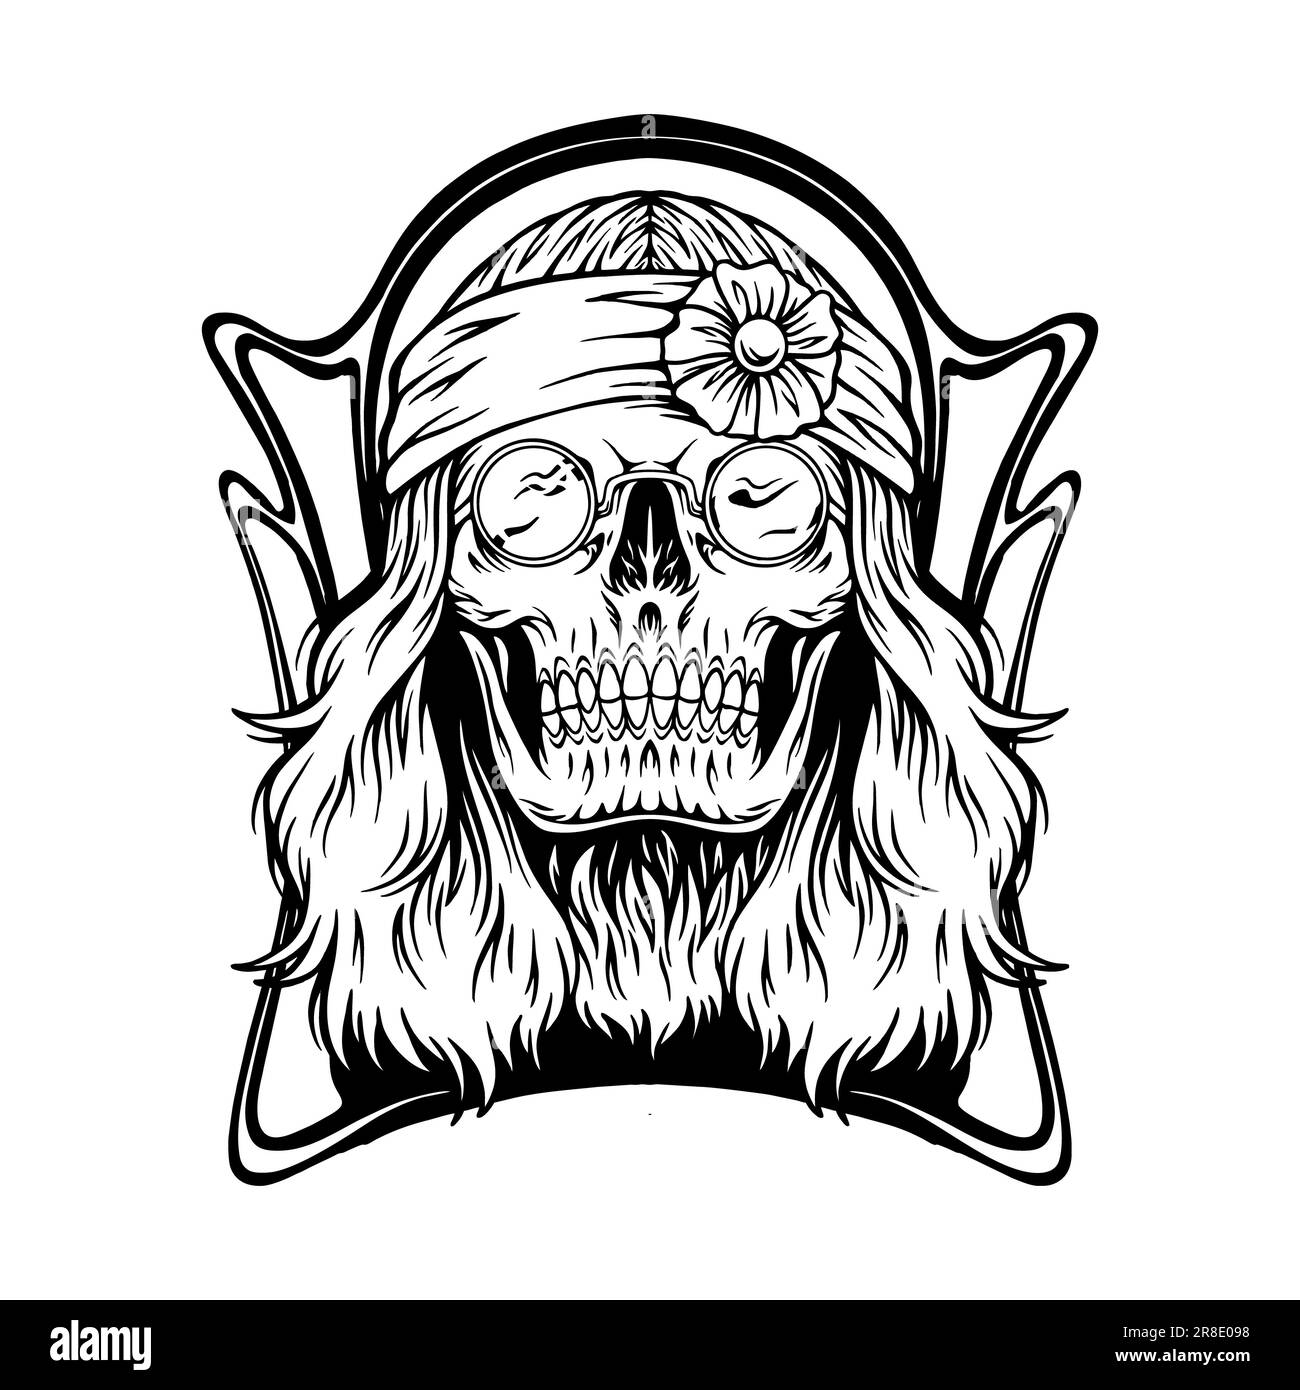 Hippie cool skull head flower headband logo illustrations monochrome vector illustrations for your work logo, merchandise t-shirt, stickers and label Stock Photo